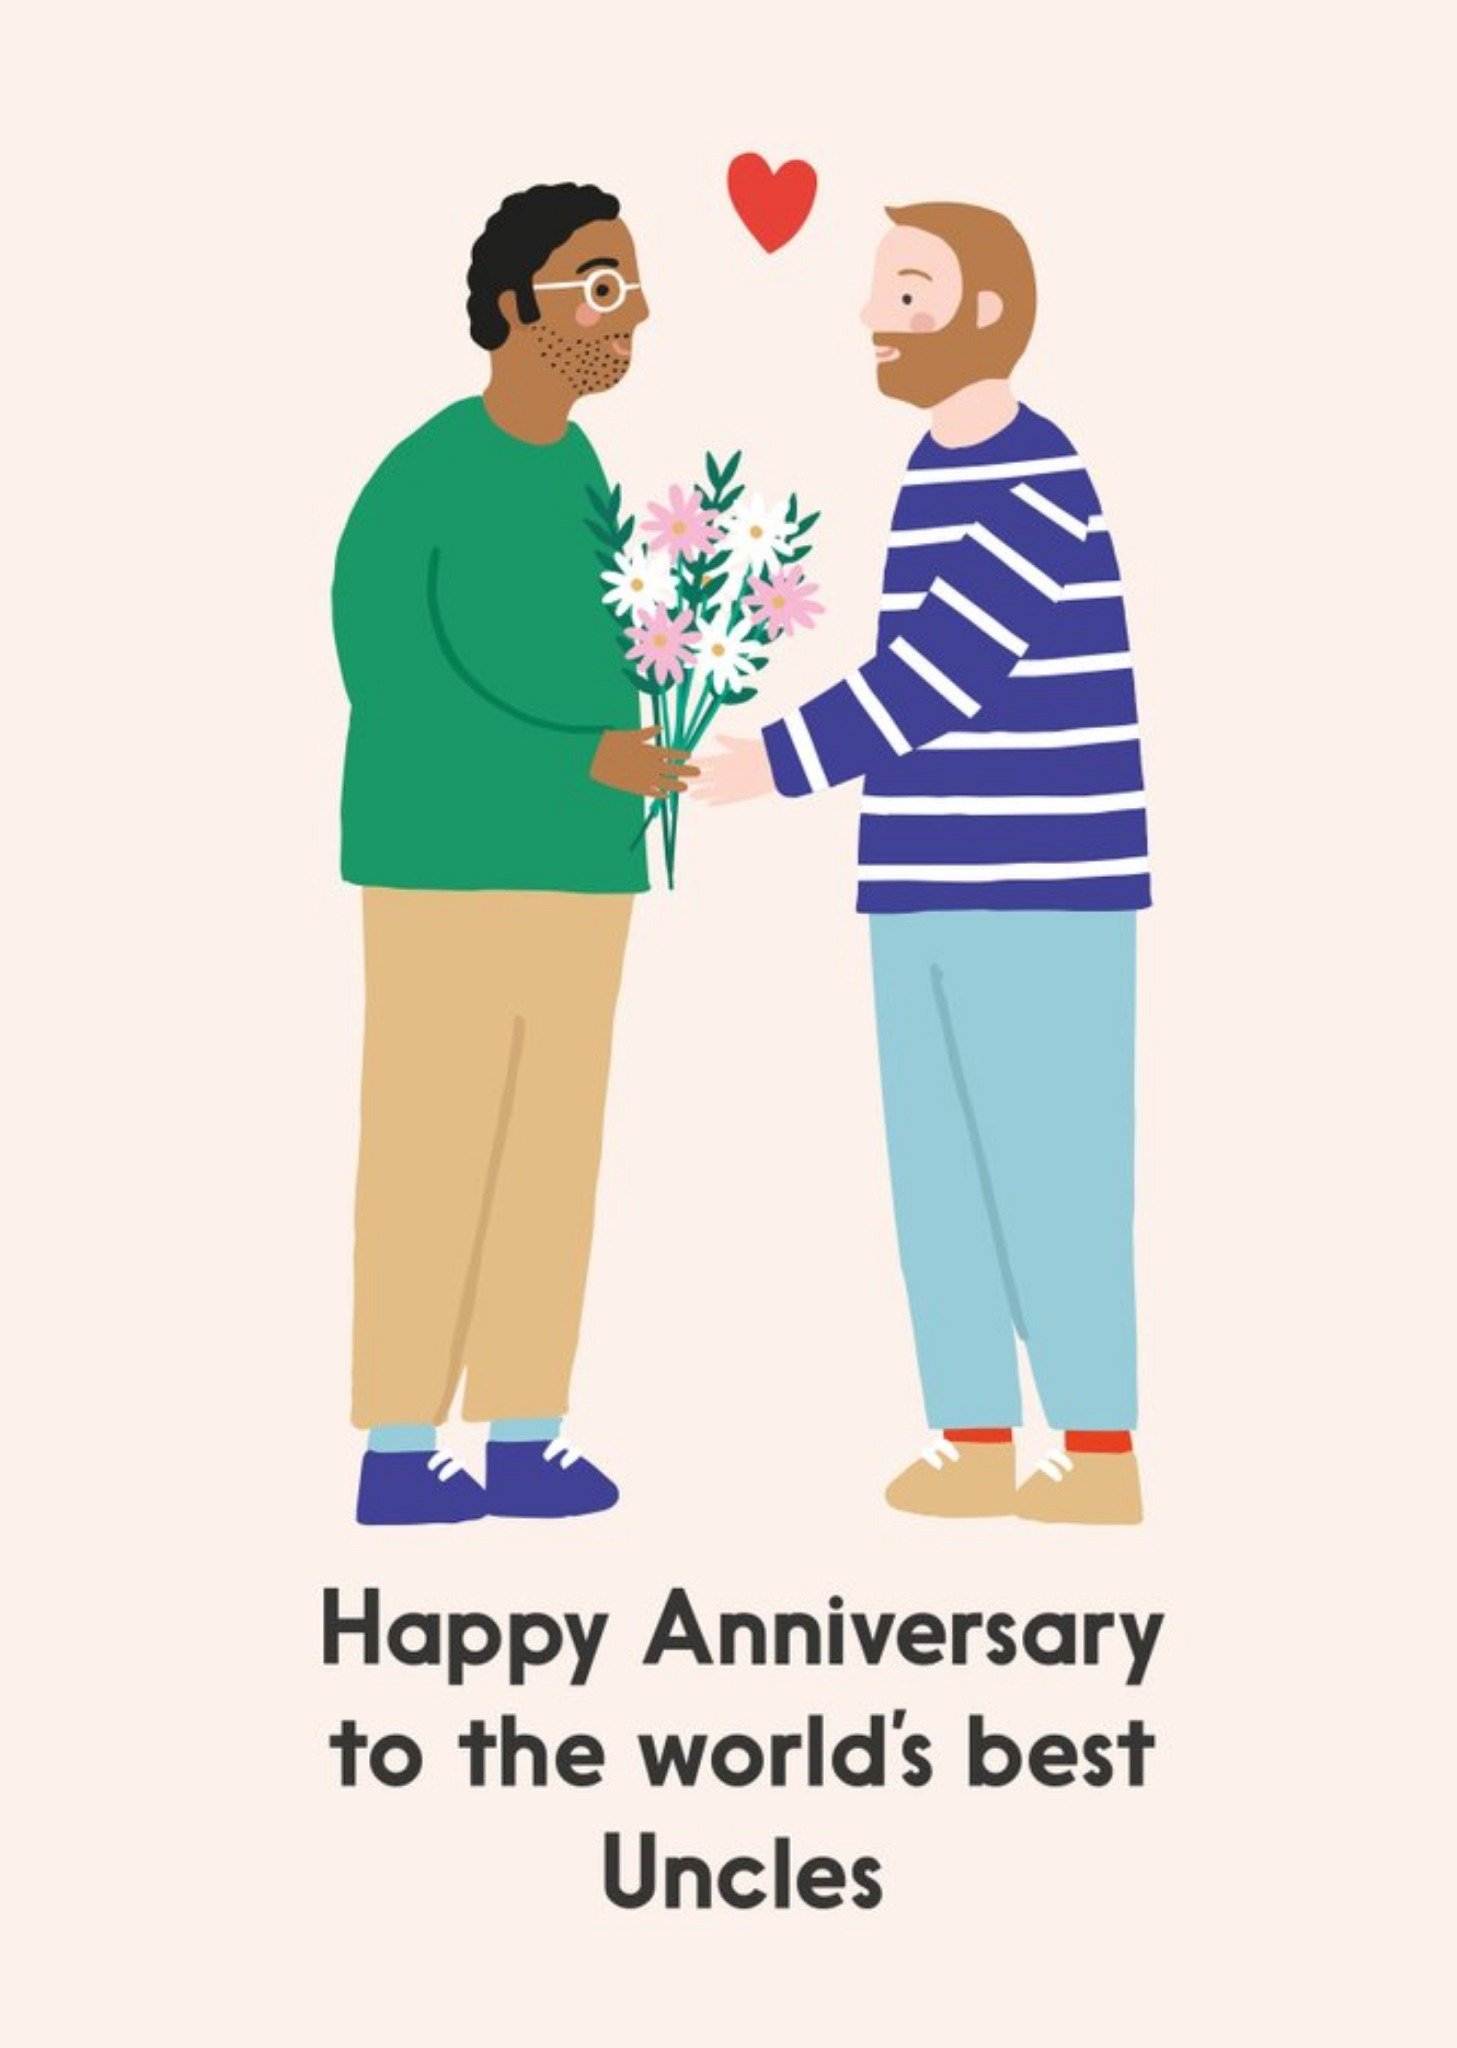 Moonpig Illustration Of A Couple Sharing Flowers World's Best Uncles Anniversary Card Ecard